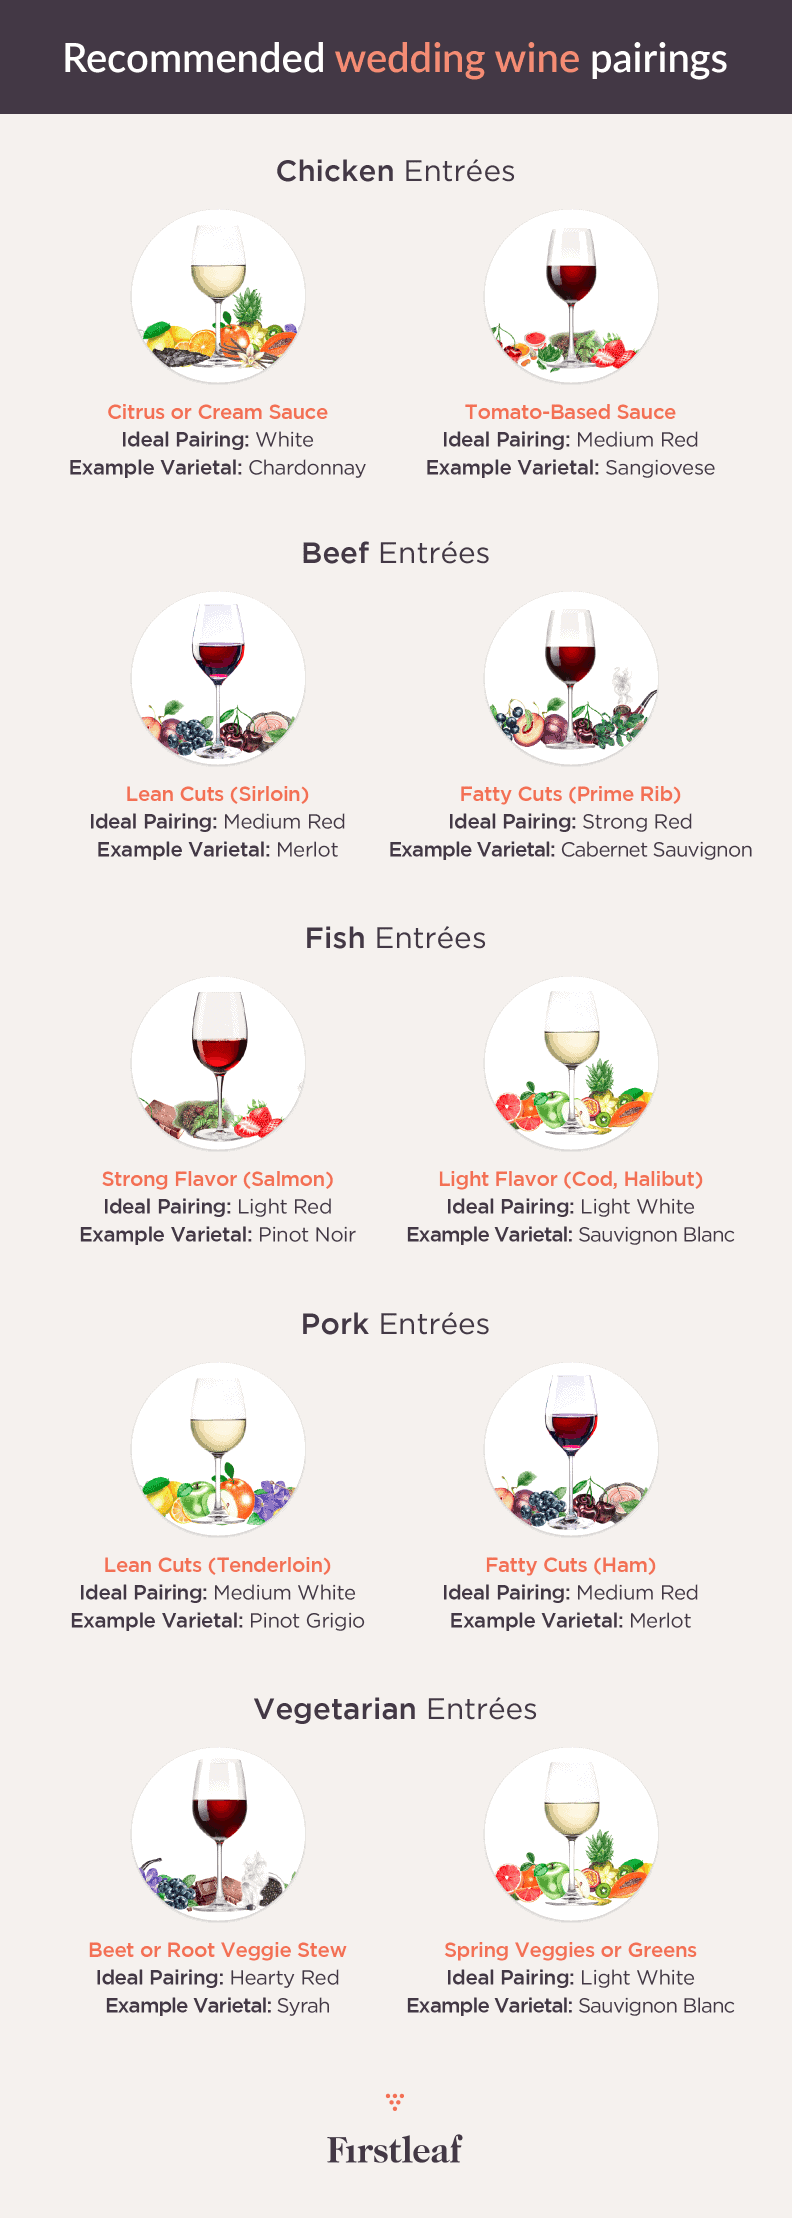 Recommended Wedding Wines Pairings